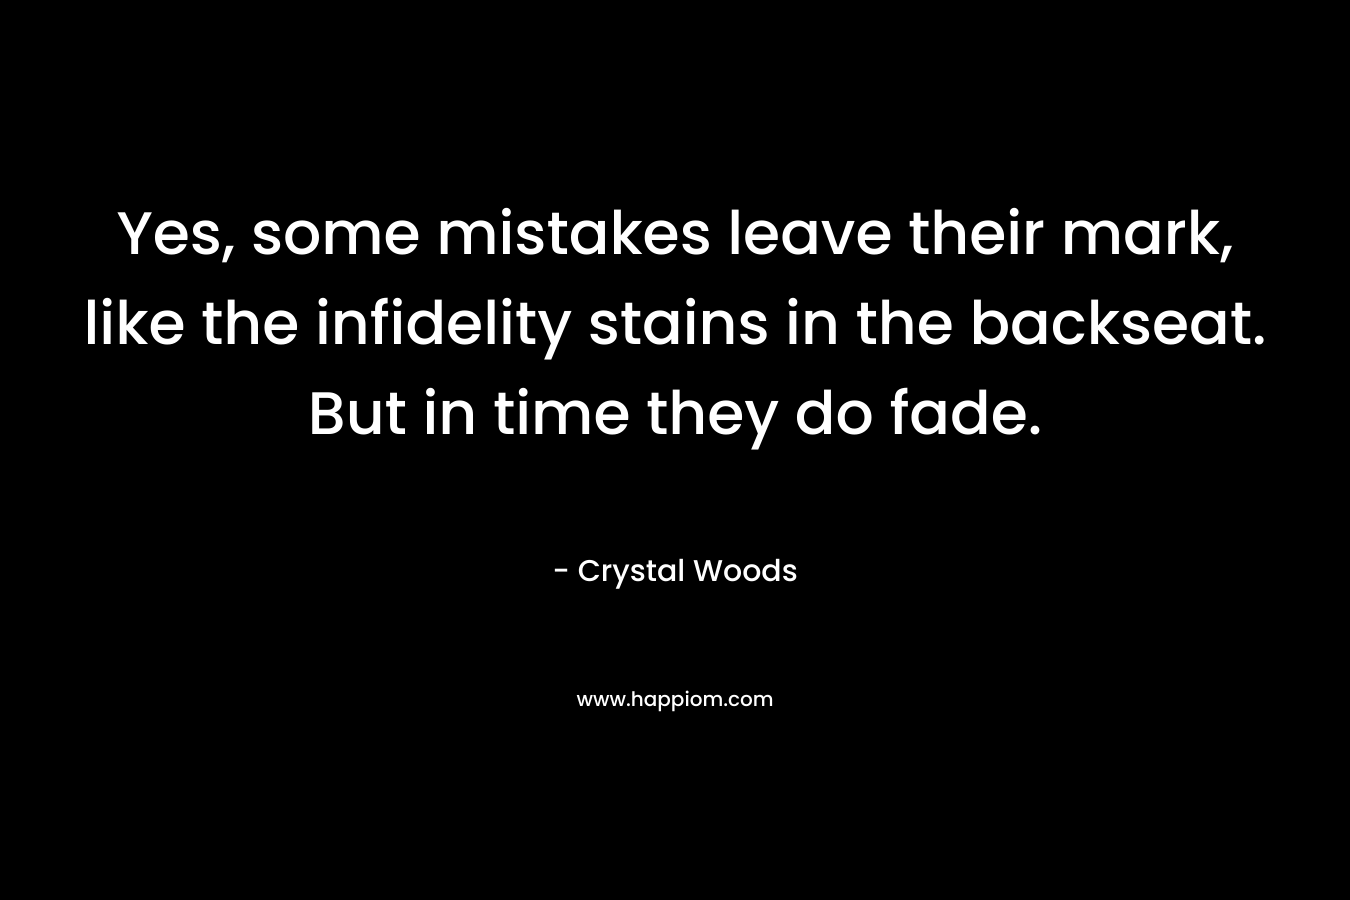 Yes, some mistakes leave their mark, like the infidelity stains in the backseat. But in time they do fade.